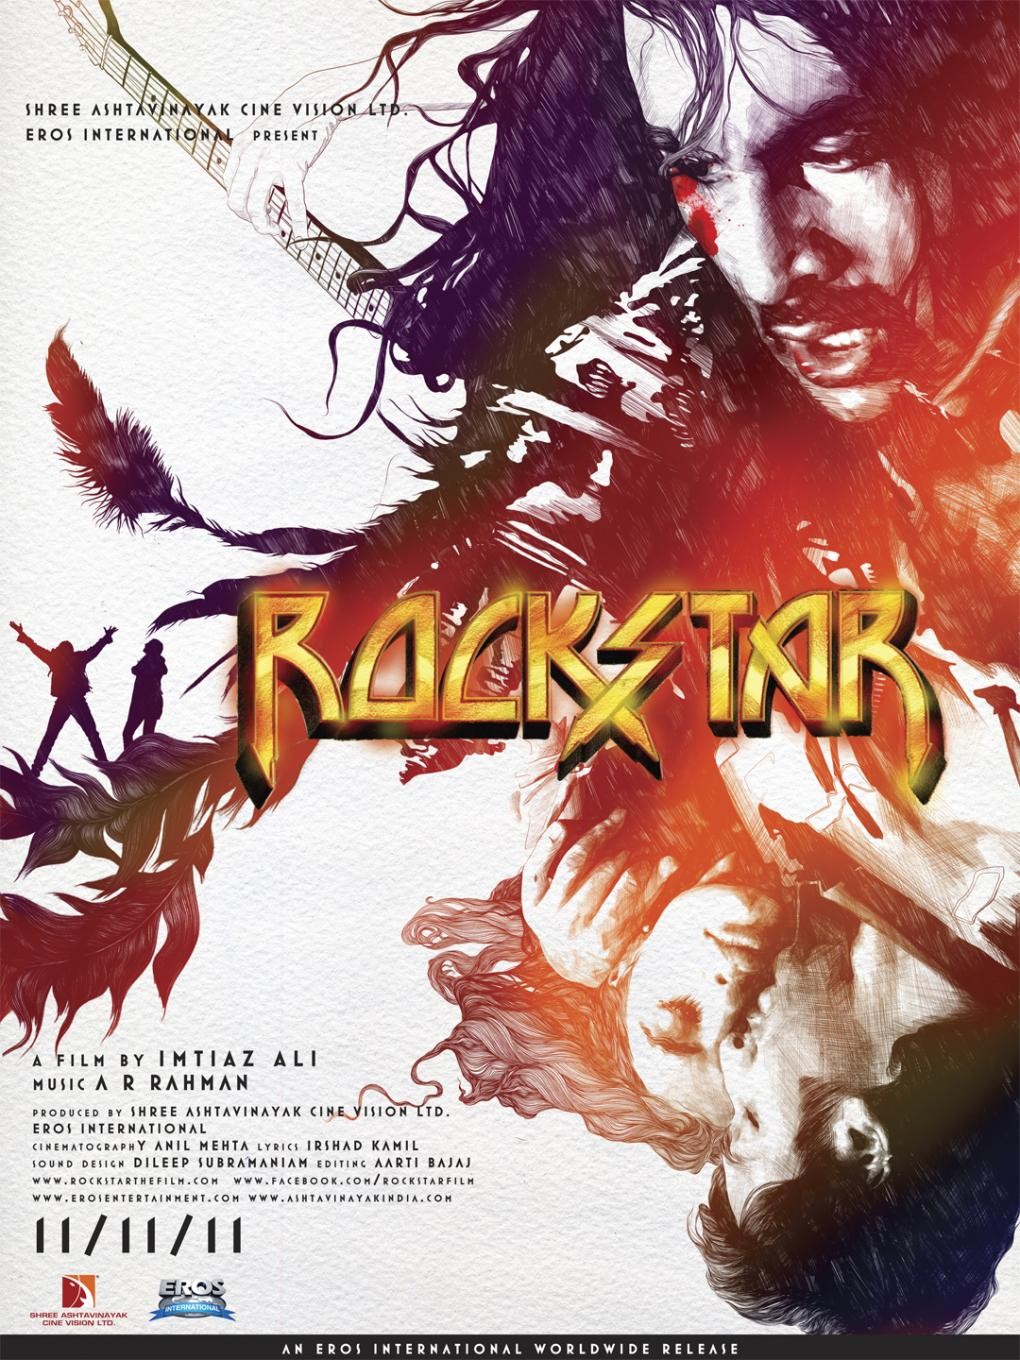 Extra Large Movie Poster Image for Rockstar 